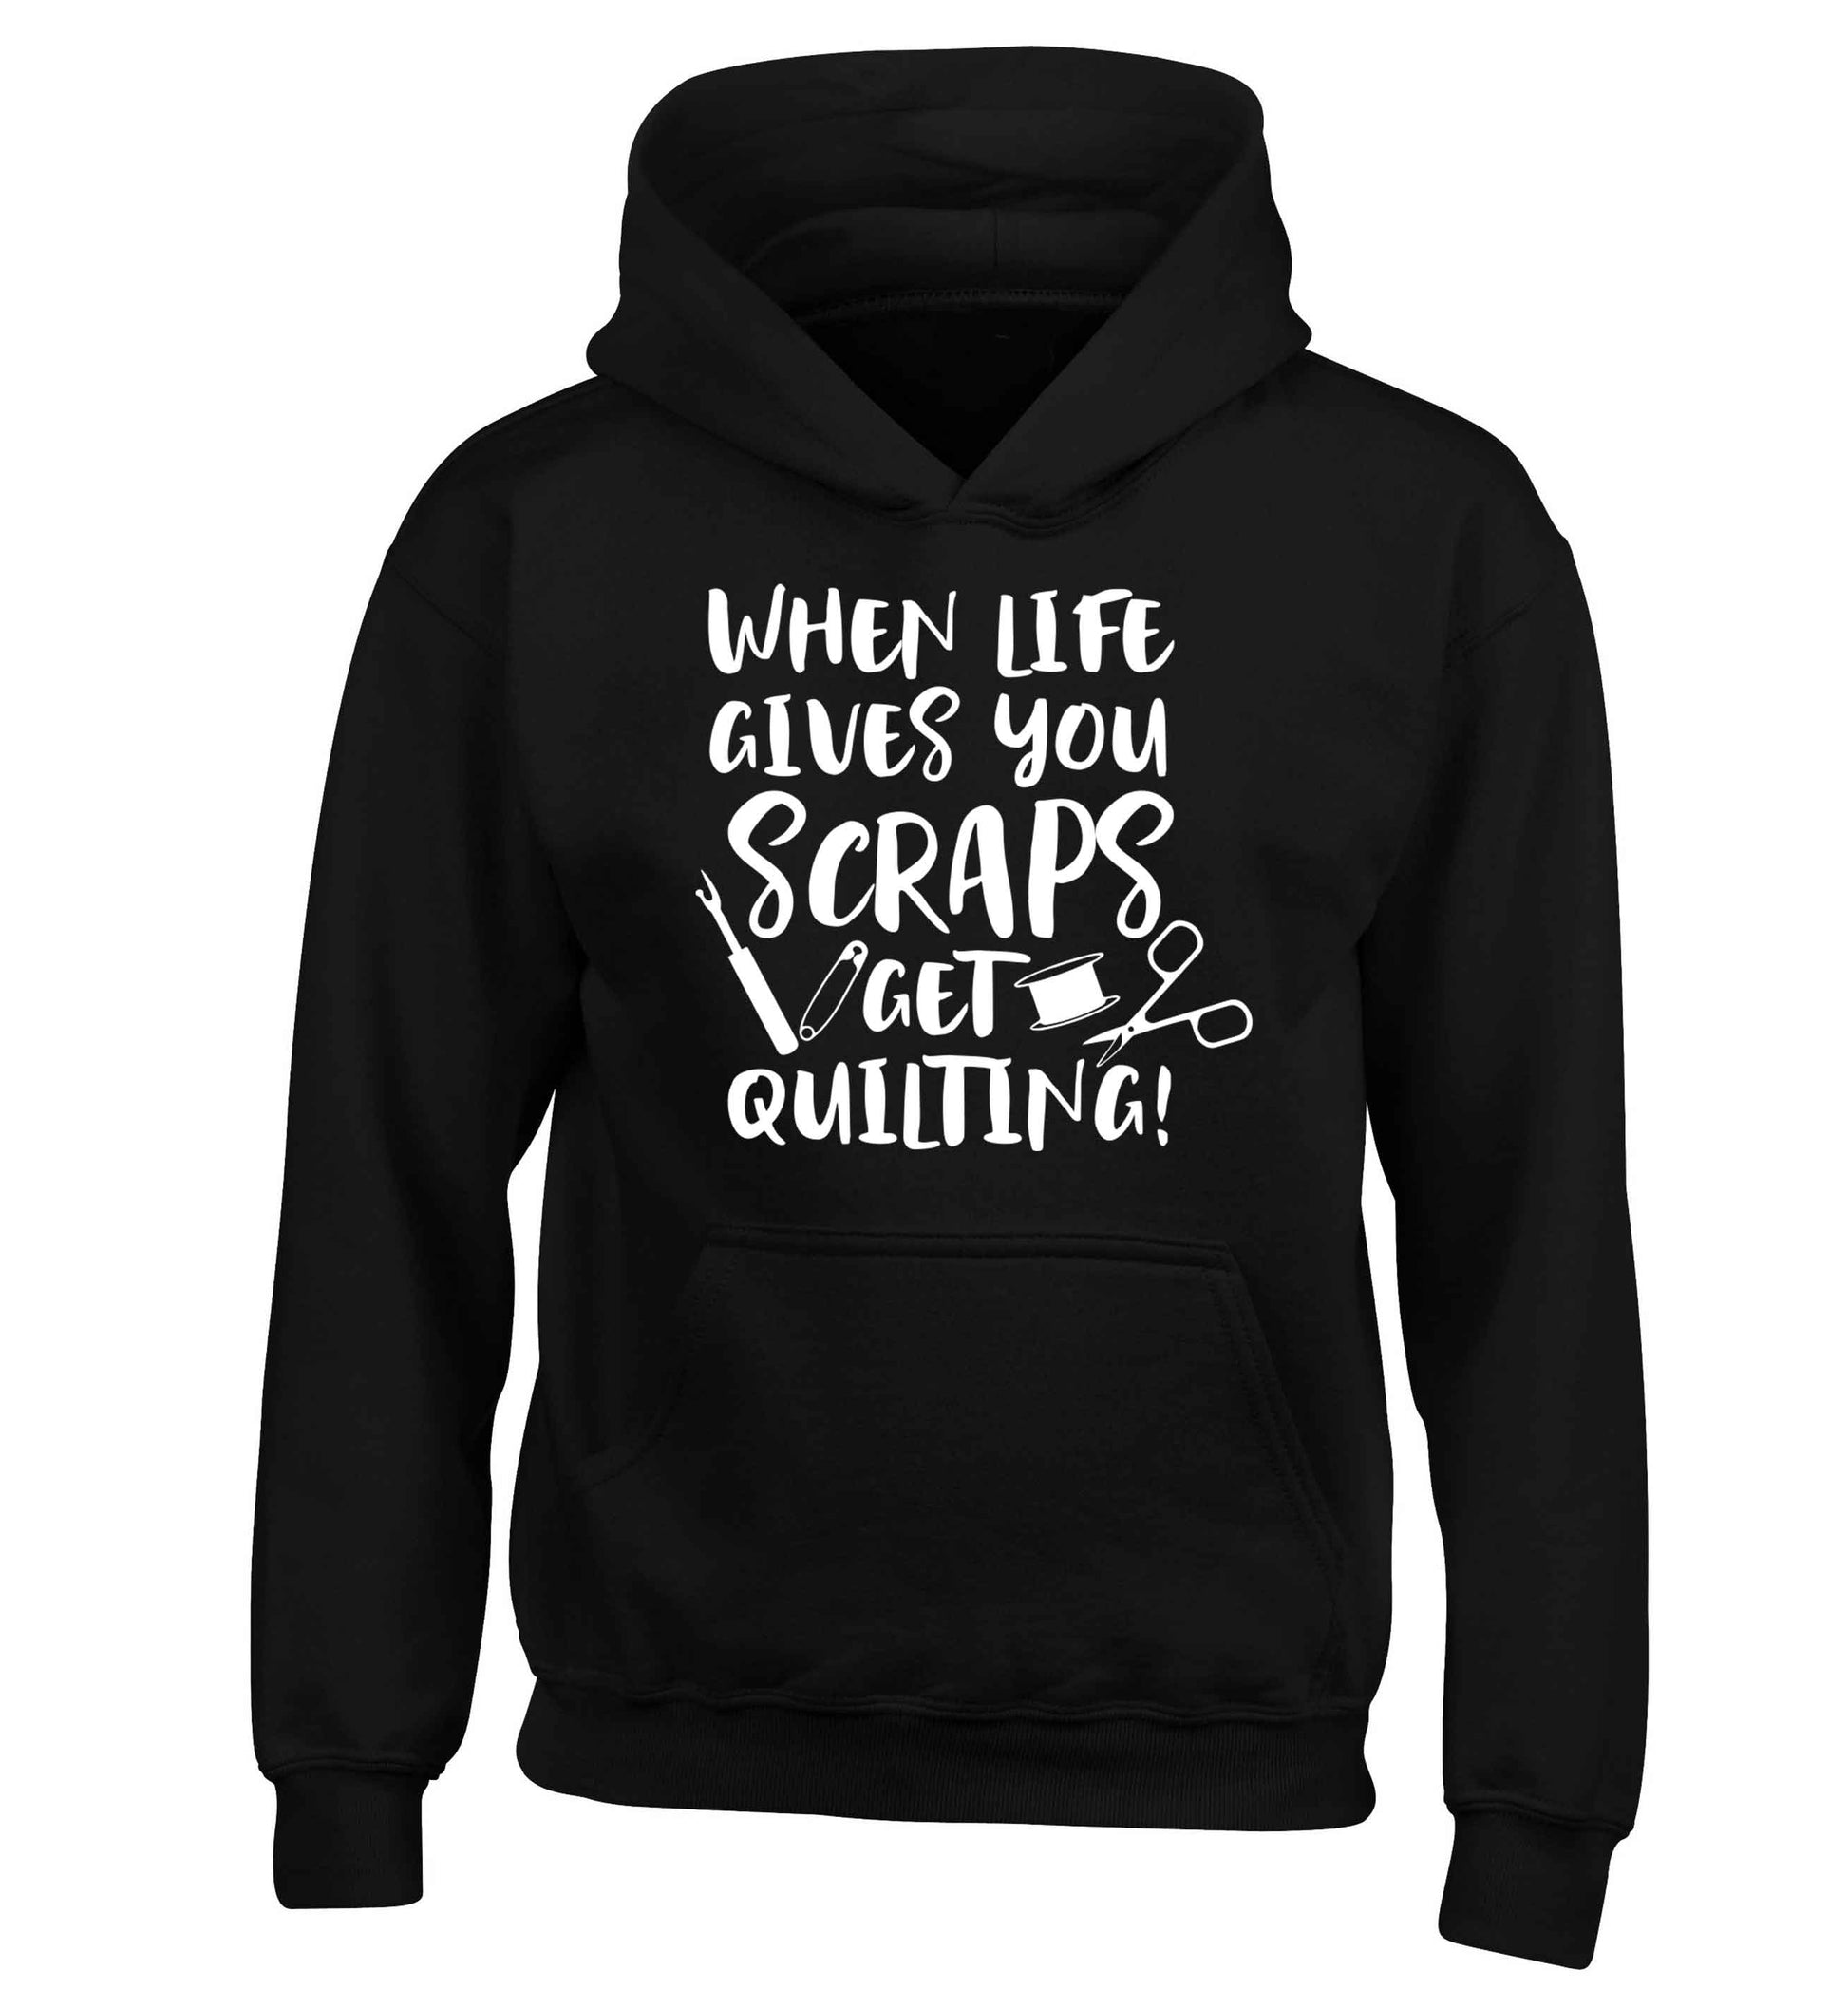 When life gives you scraps get quilting! children's black hoodie 12-13 Years